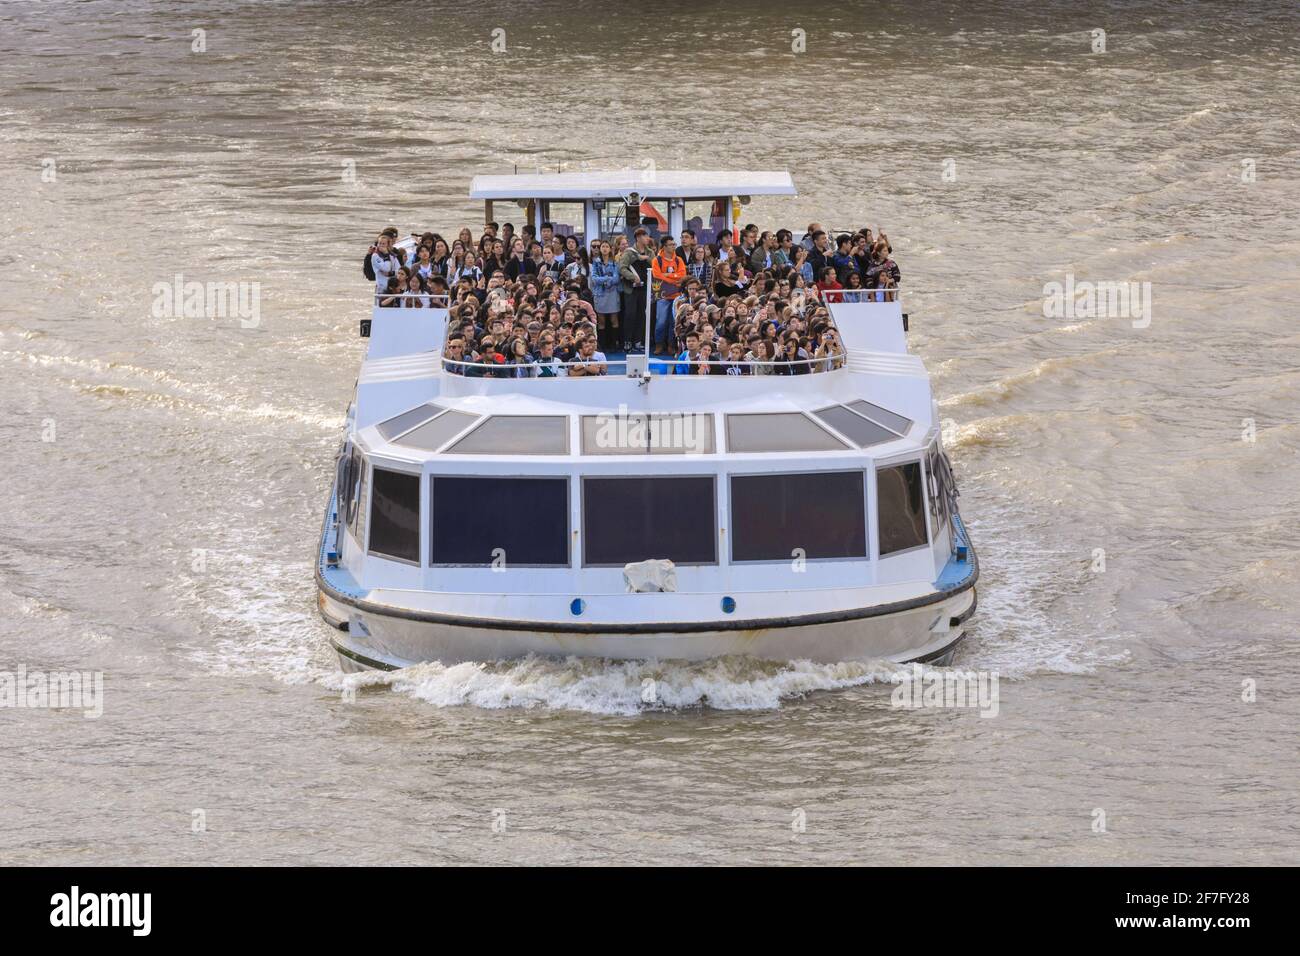 Tourists on a Thames river cruise boat in London, England, UK Stock Photo